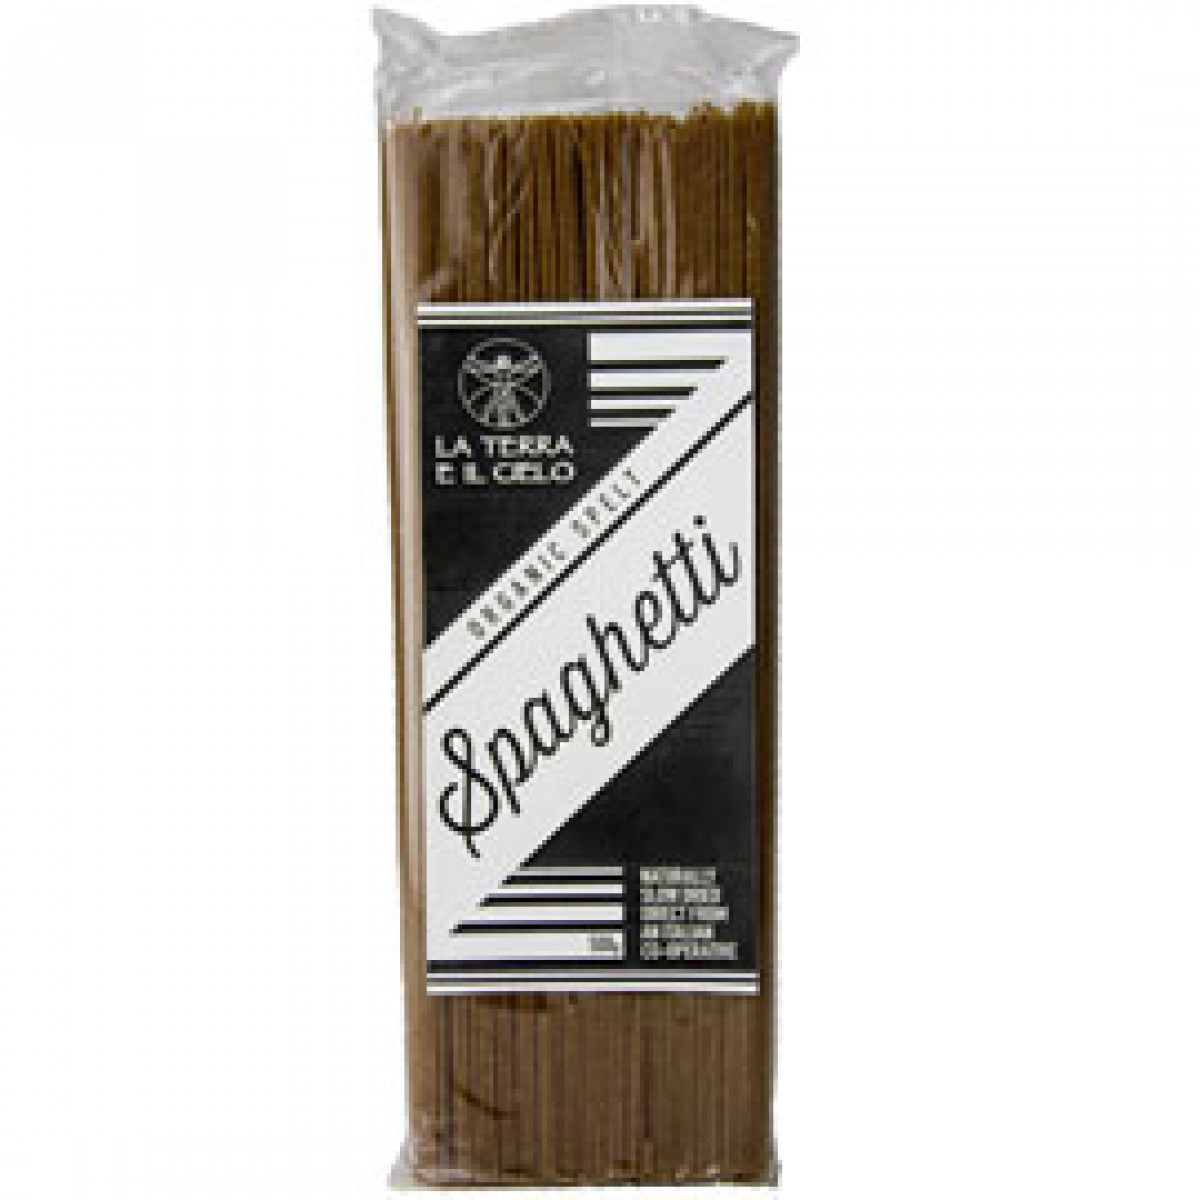 Product picture for Spelt Spaghetti